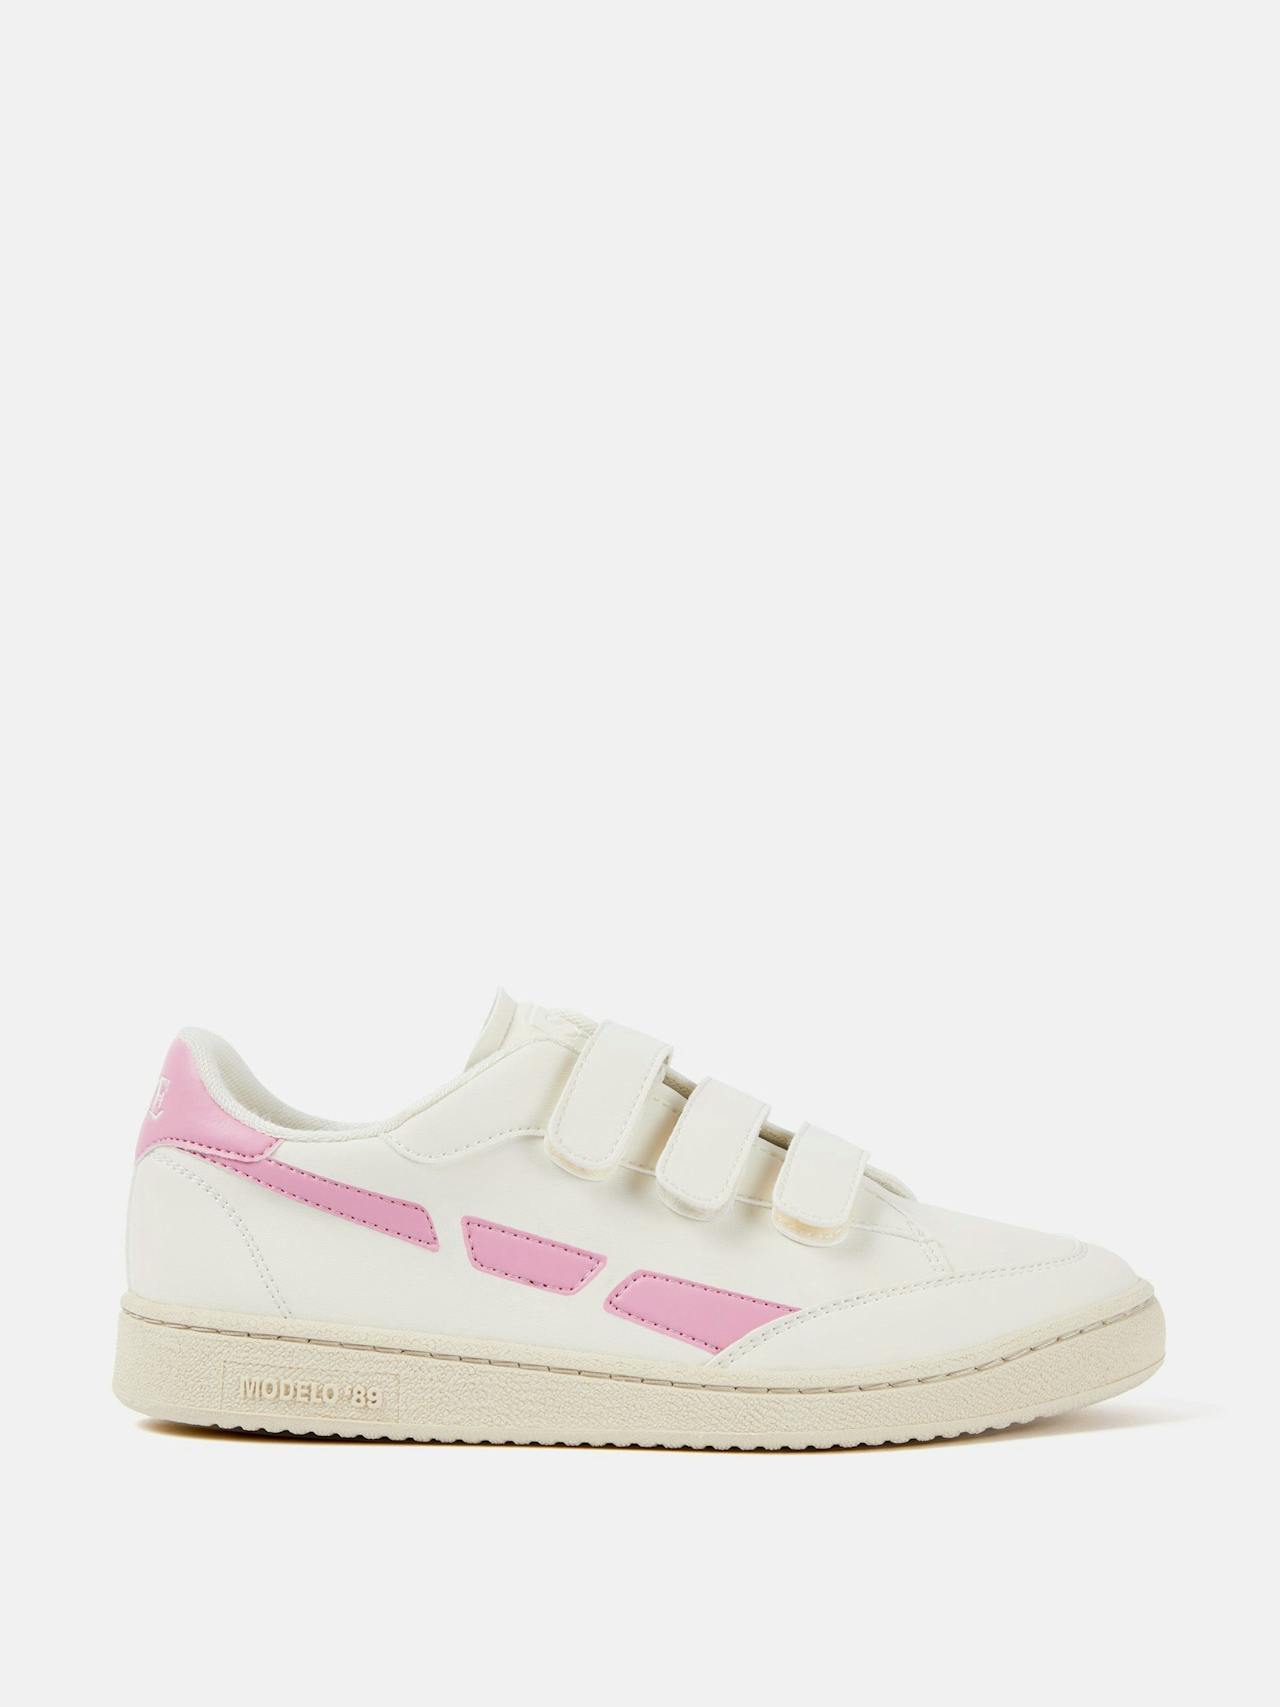 Modelo '89 strap trainer in pink